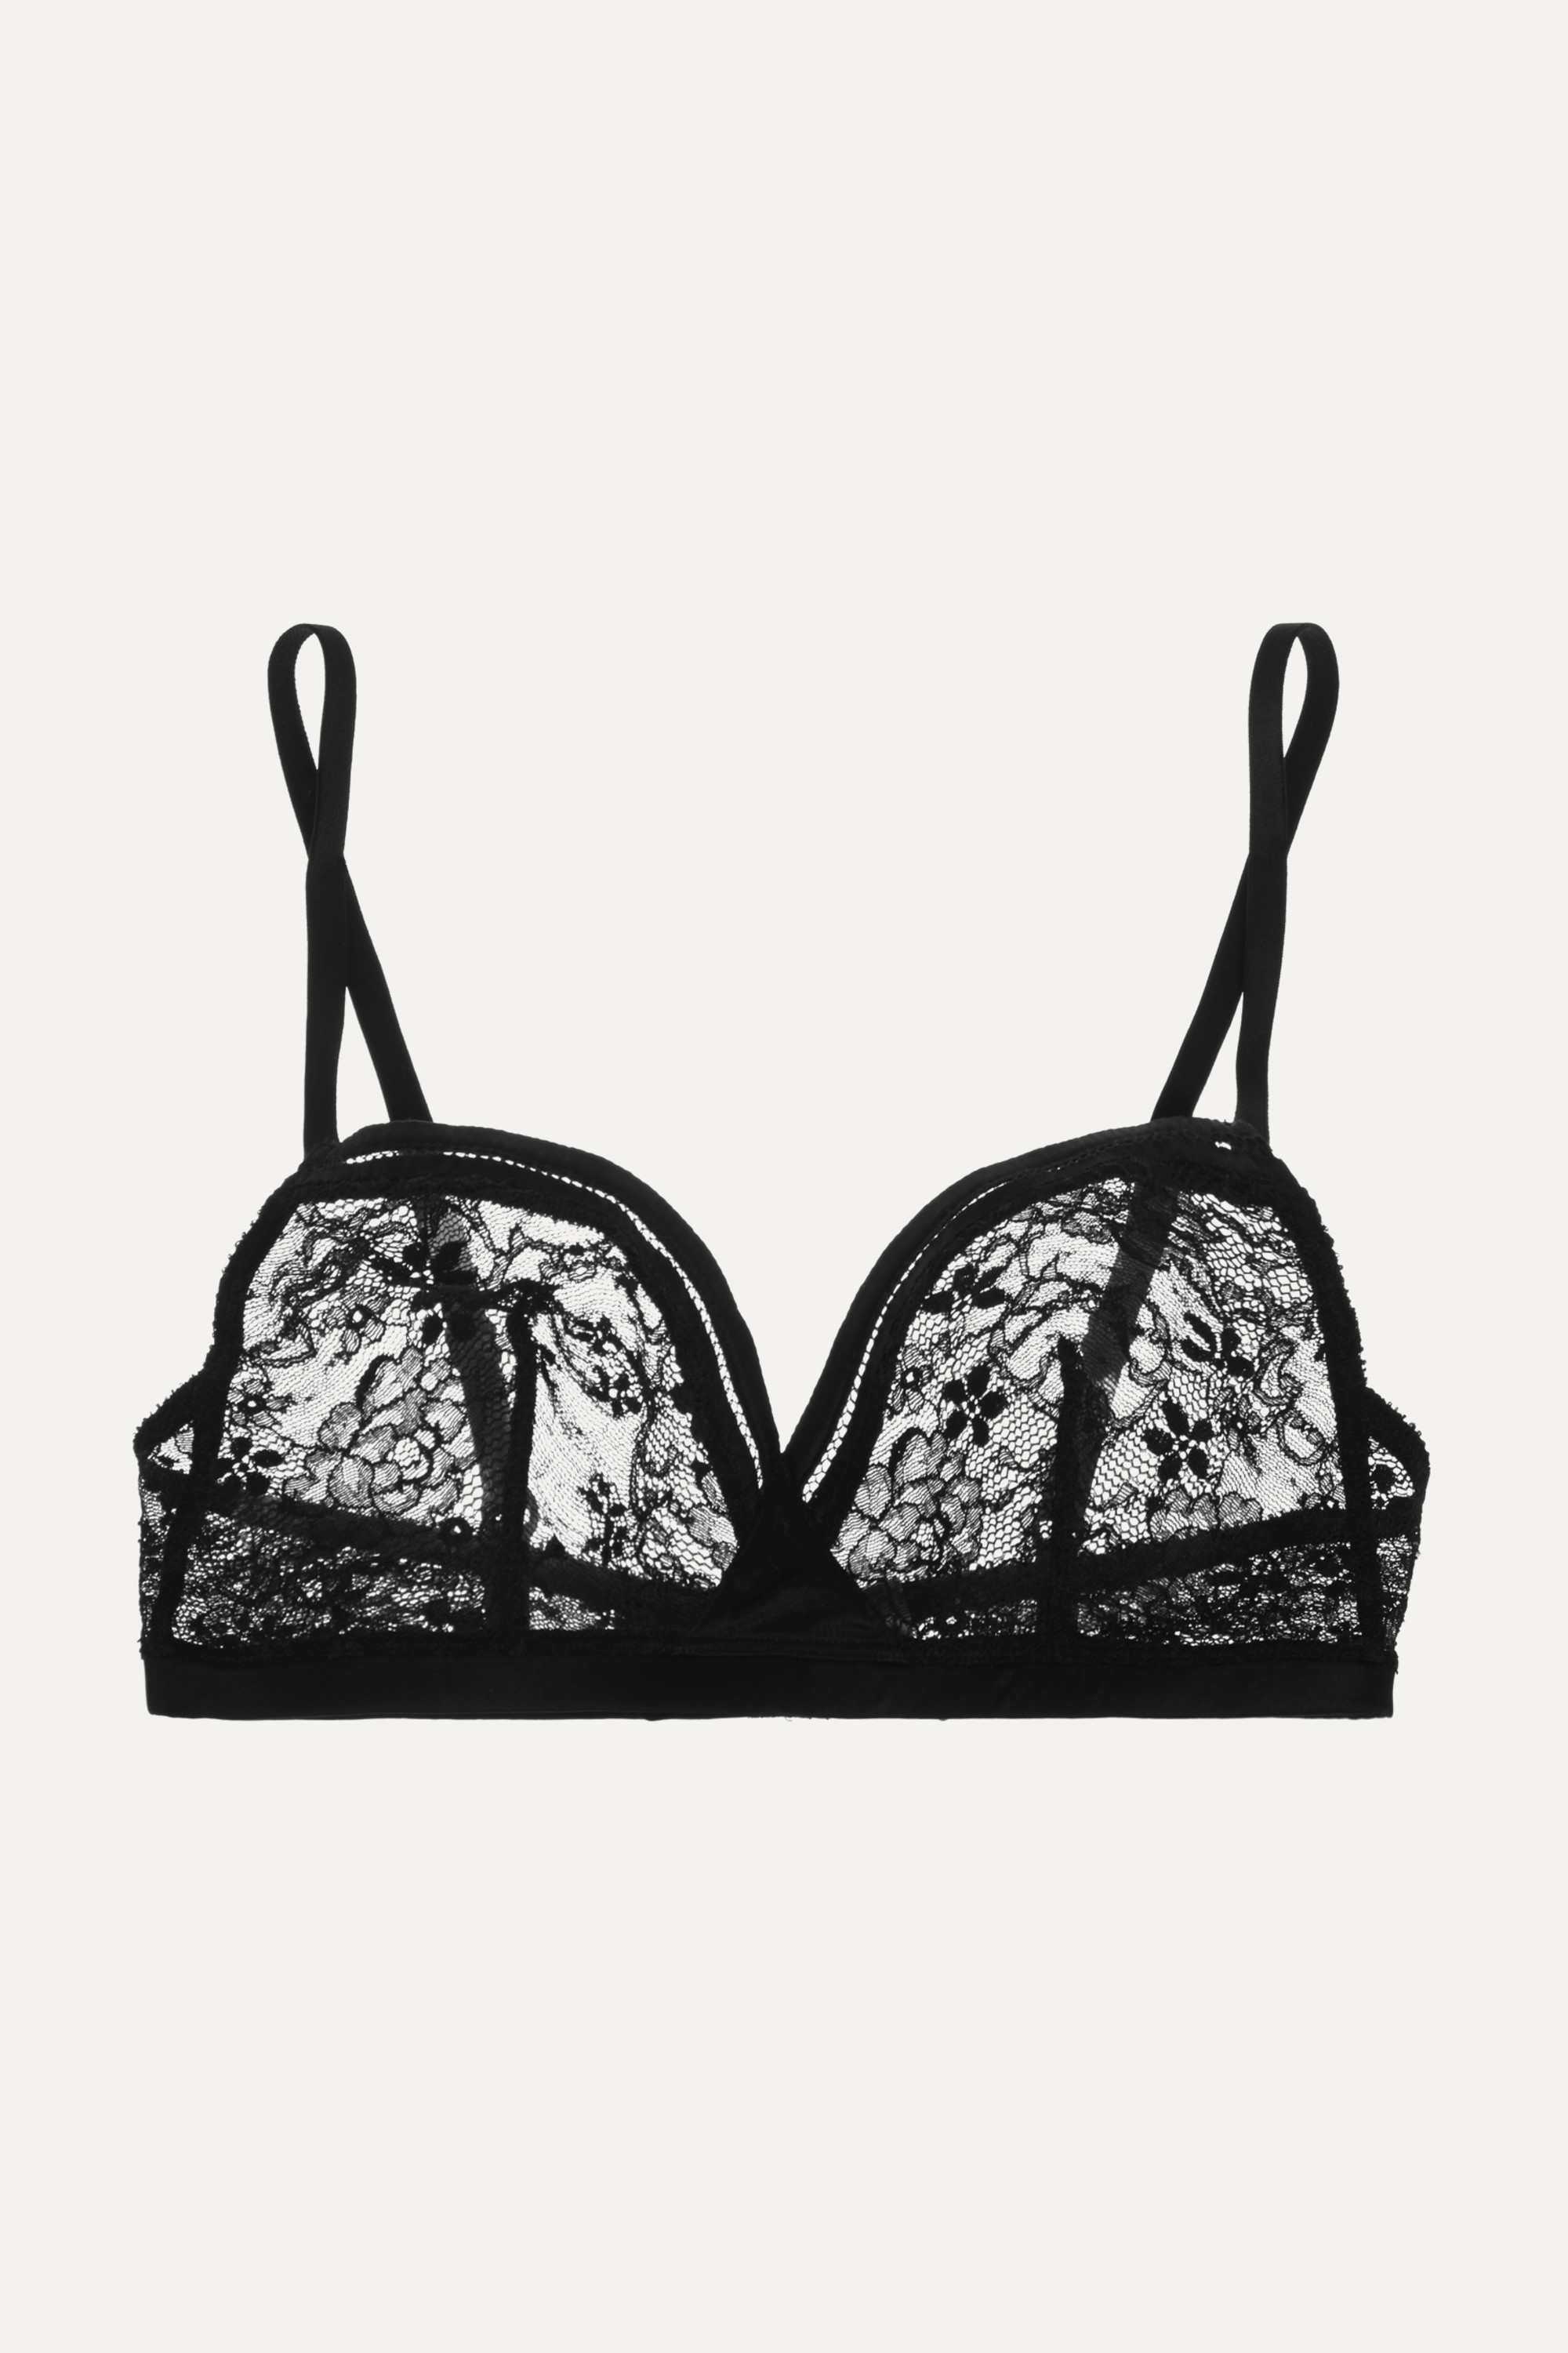 French Lingerie Every Parisian Owns | Who What Wear